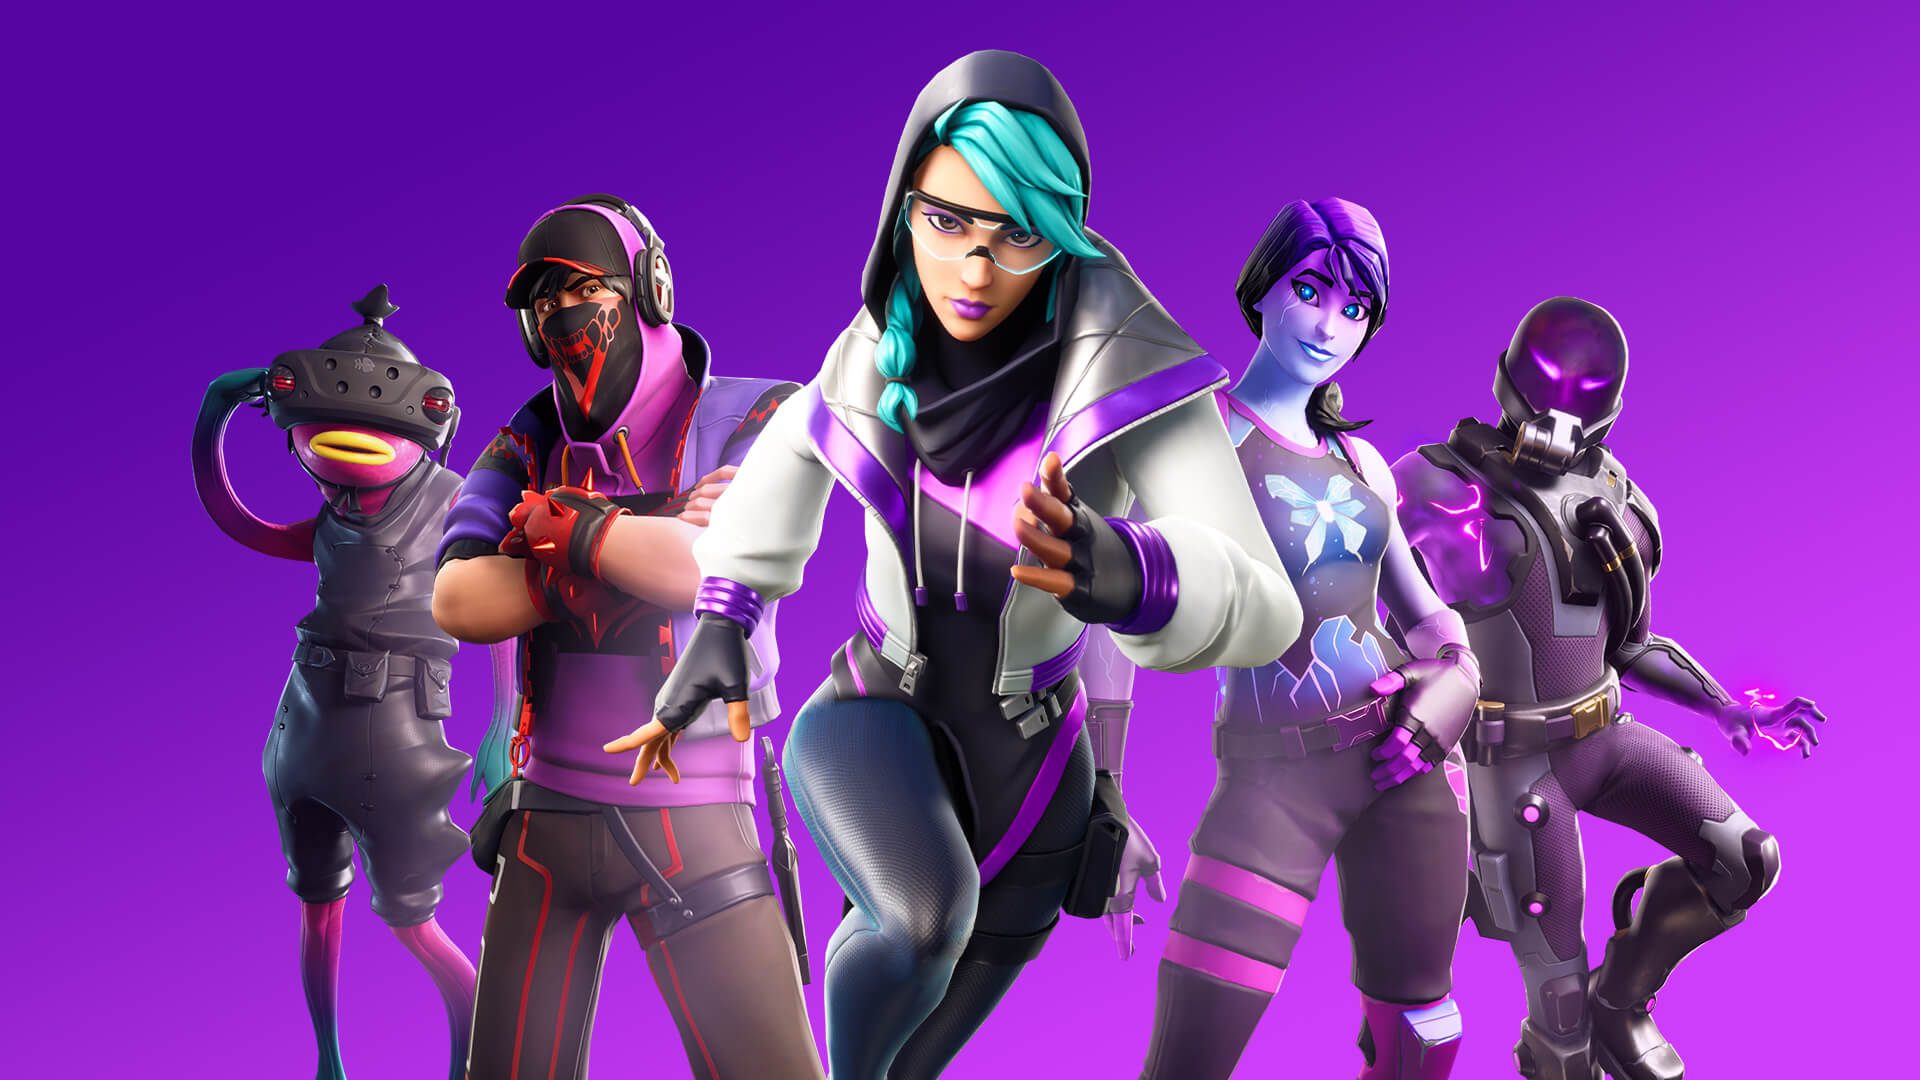 How does skill based matchmaking work in Fortnite?